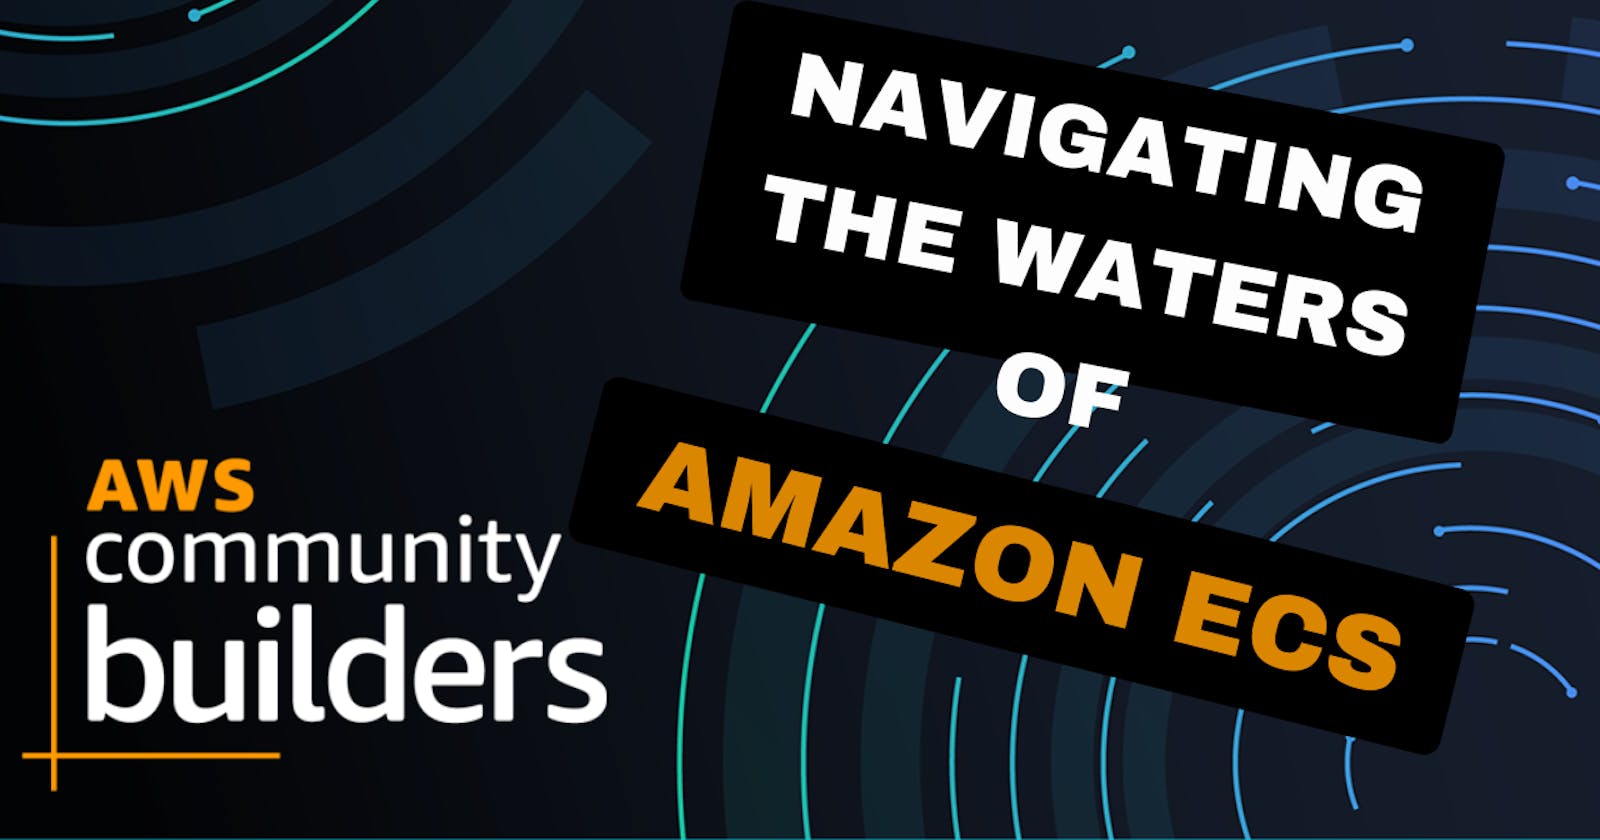 Navigating the Waters of Amazon ECS: Your Voyage into Container Orchestration